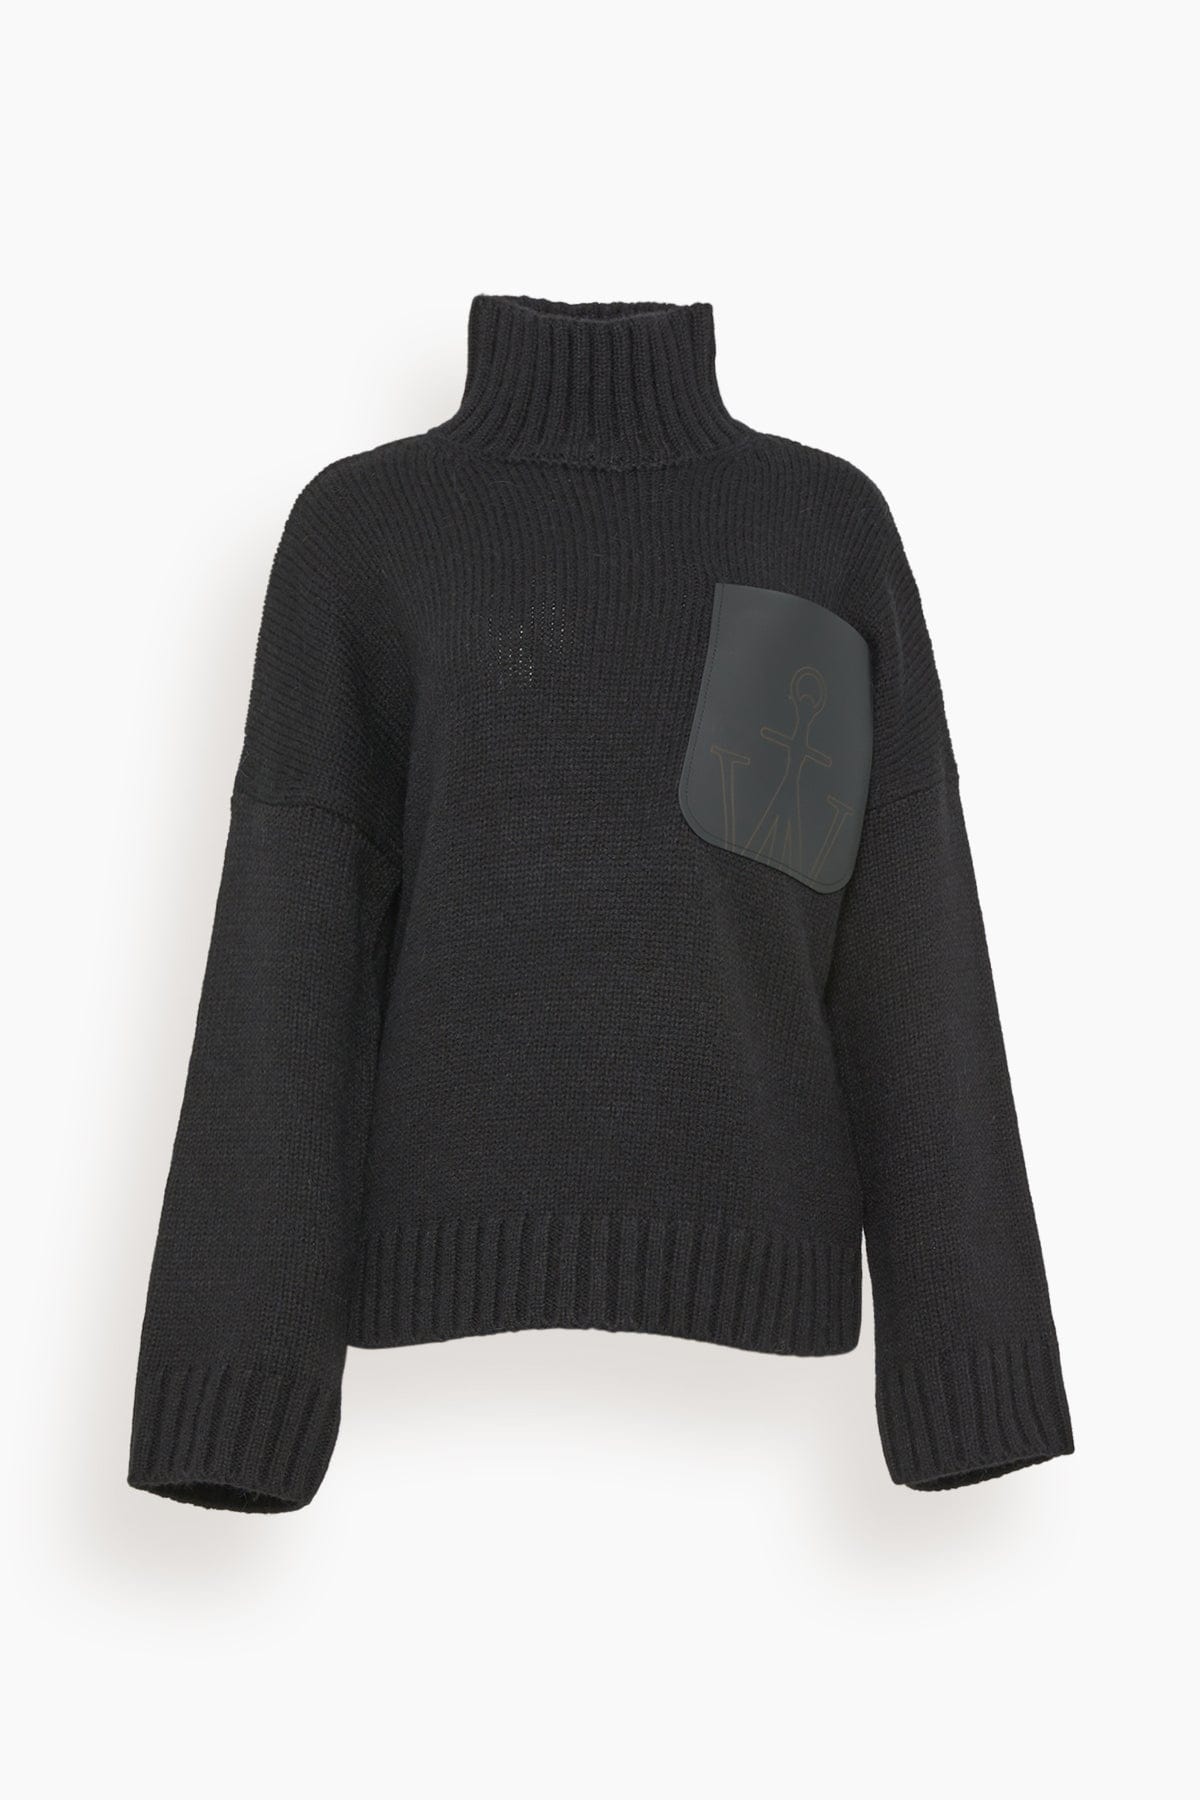 JW Anderson Sweaters Leather Patch Pocket Jumper in Black